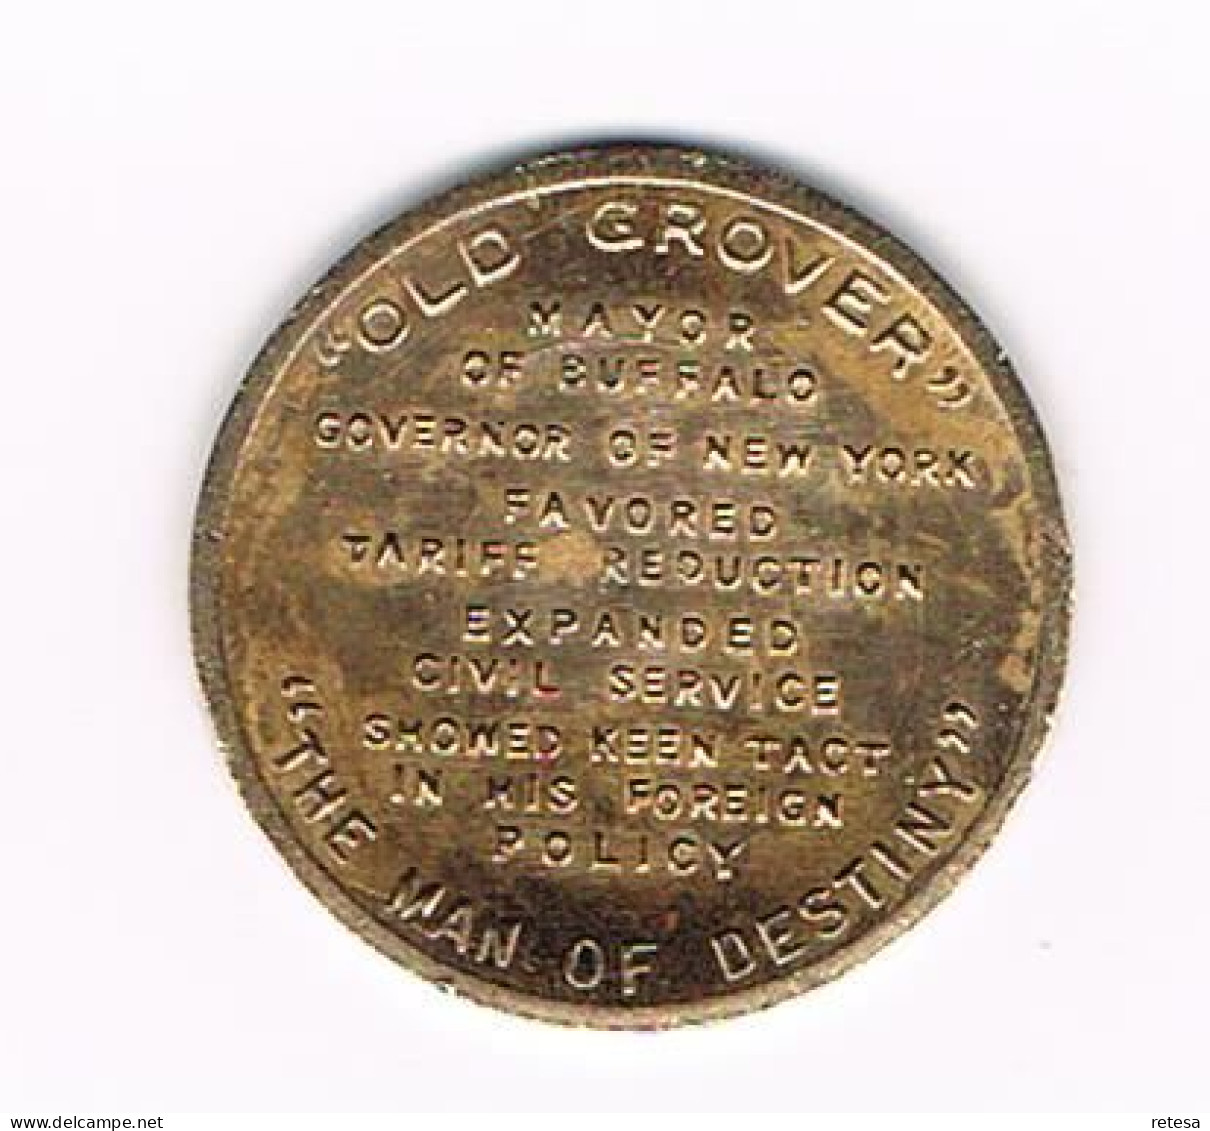 # PENNING  GROVER CLEVELAND 24 TH  PRESIDENT  U.S.A. - Elongated Coins